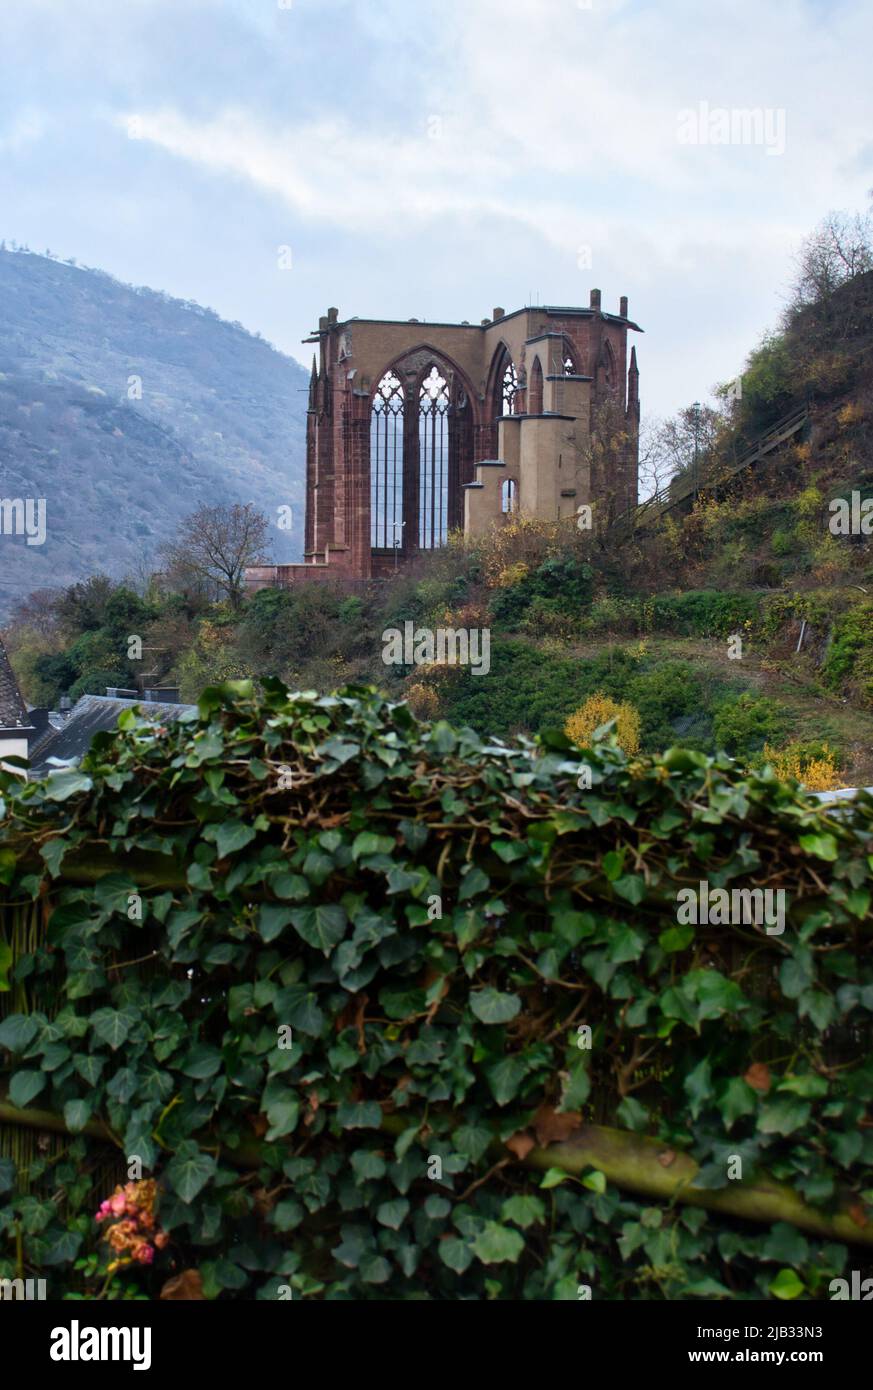 Green plants growing near Wernerkapelle ruins above Bacharach, Germany on a fall day. Stock Photo